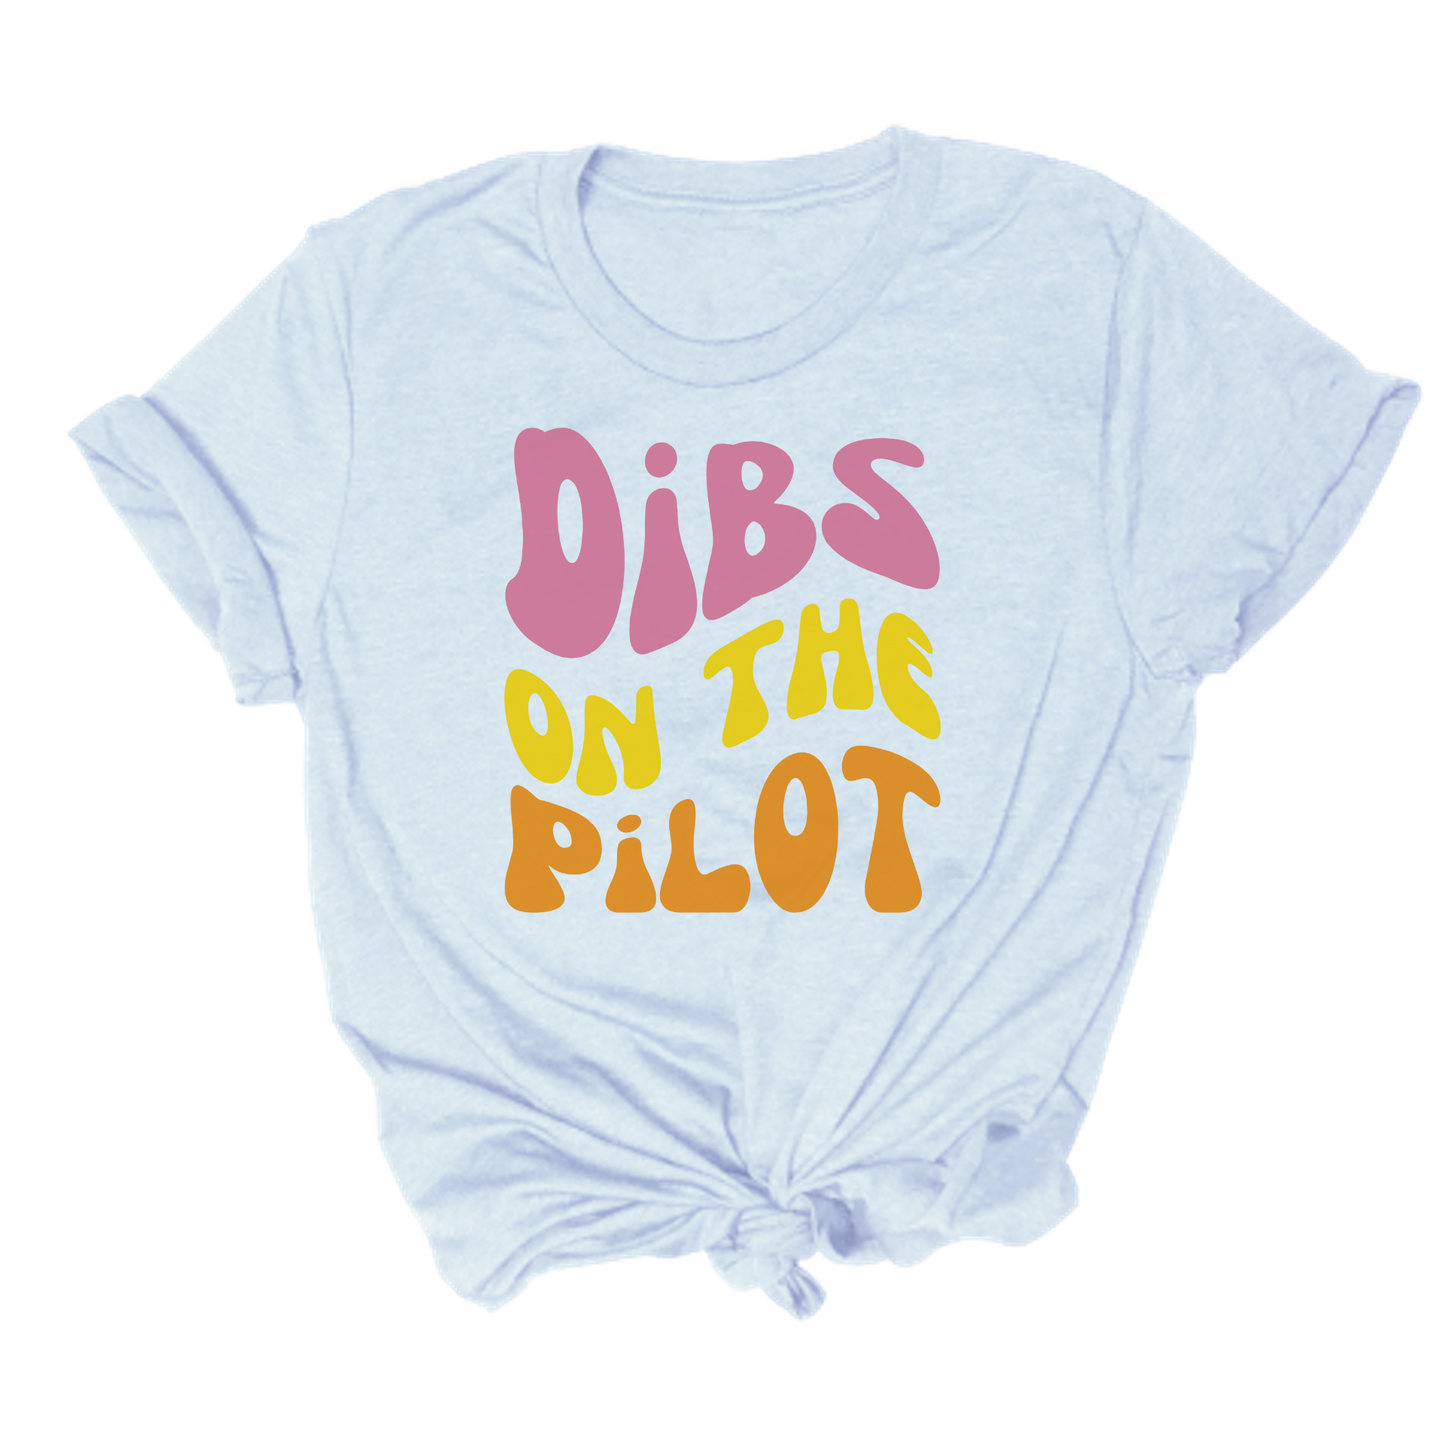 funny tshirt for pilot wives or girlfriends that says "dibs on the pilot"